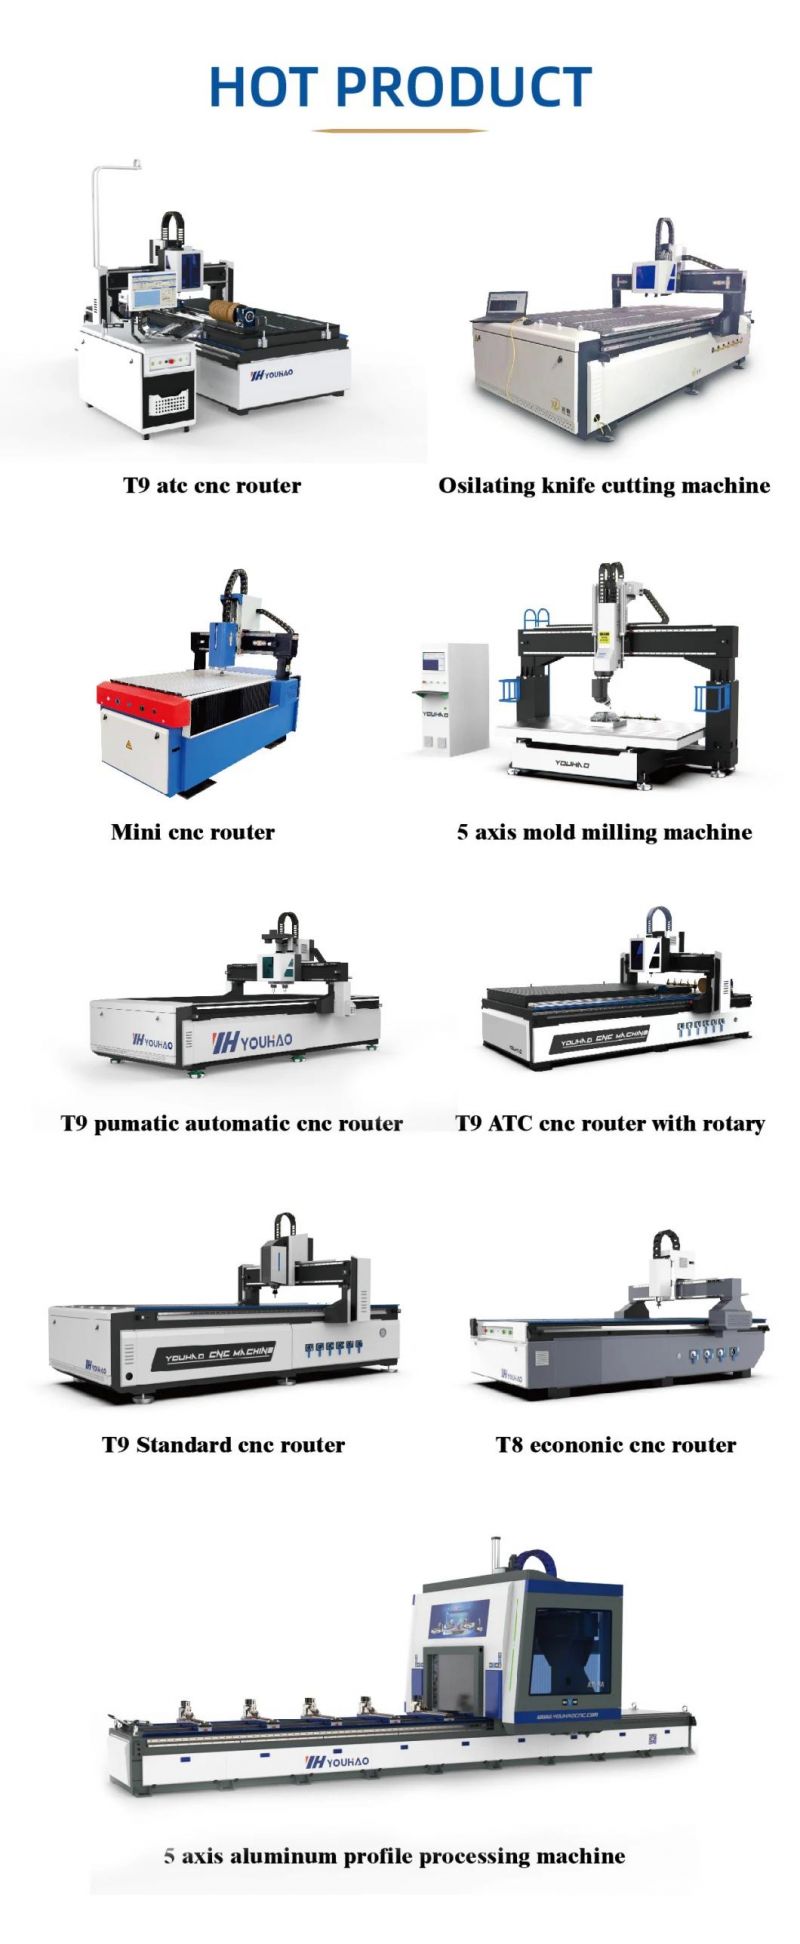 CNC Router Atc Rotate Swing Head 1530 2030 2040 4 Axis Woodworking Machine